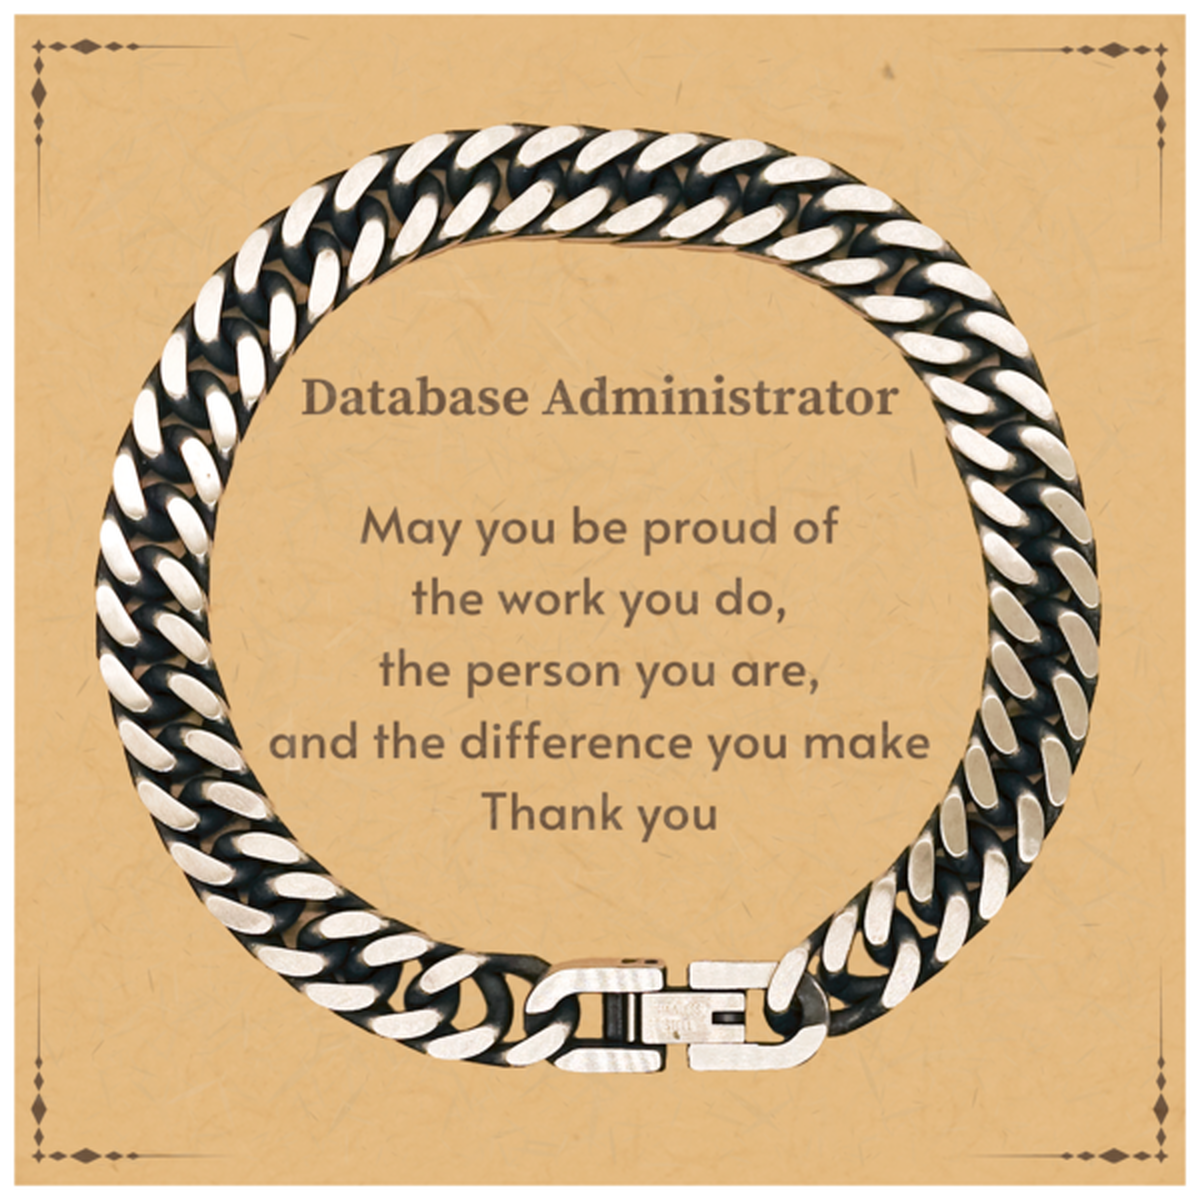 Heartwarming Cuban Link Chain Bracelet Retirement Coworkers Gifts for Database Administrator, Database Administrator May You be proud of the work you do, the person you are Gifts for Boss Men Women Friends